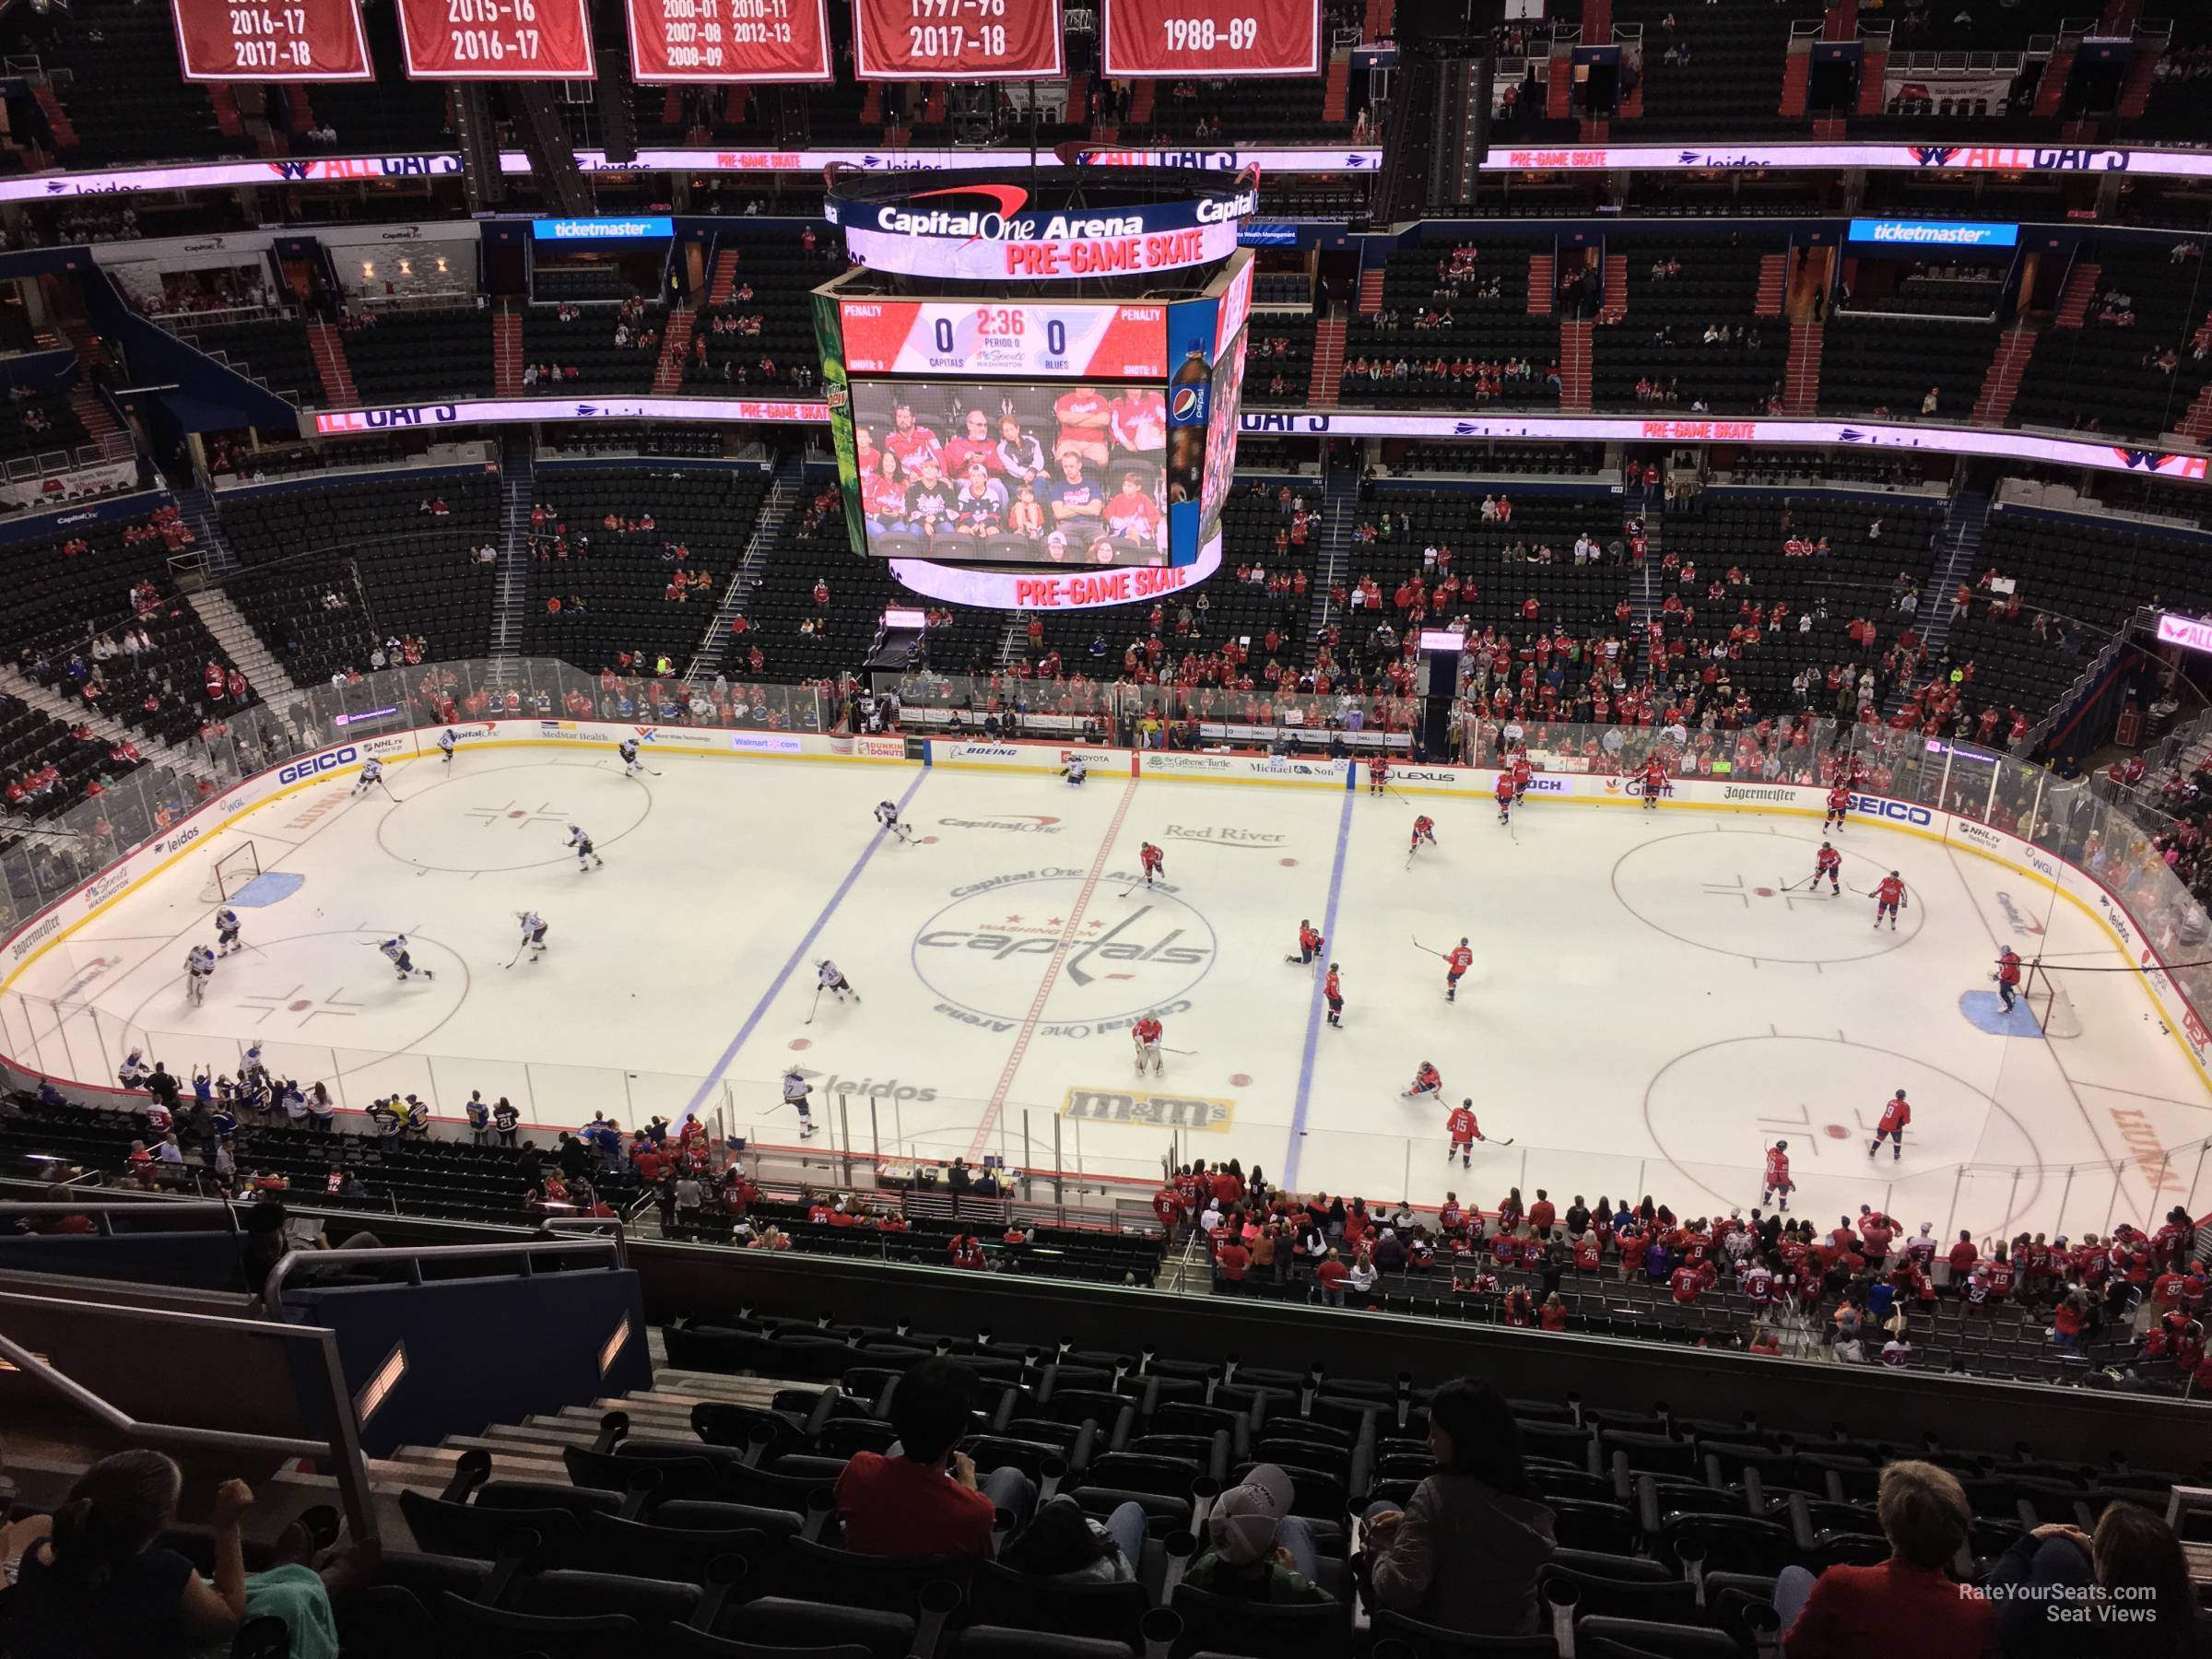 section 418, row m seat view  for hockey - capital one arena